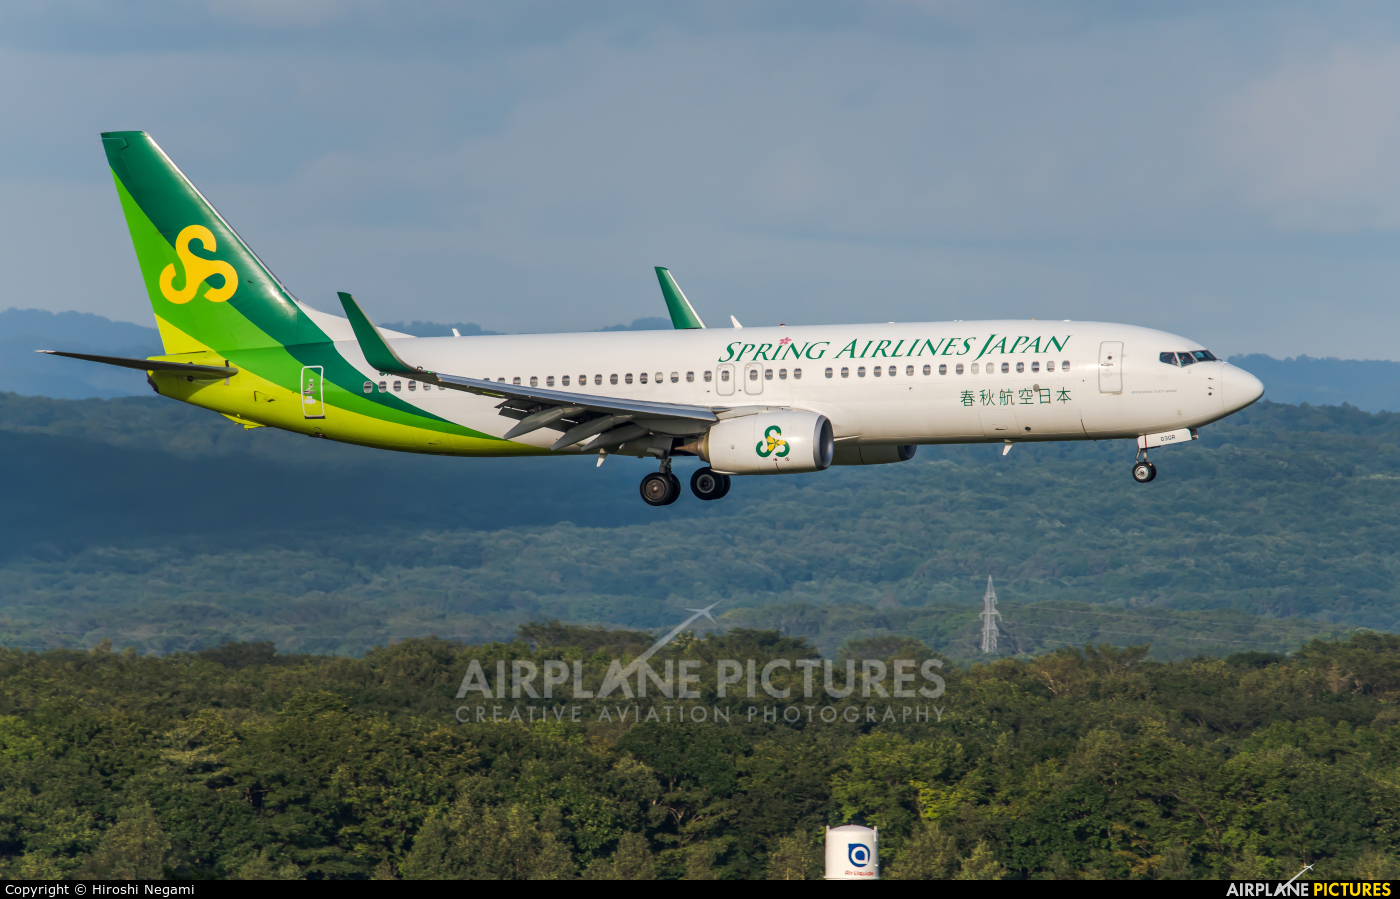 Spring Airlines Japan JA03GR aircraft at New Chitose